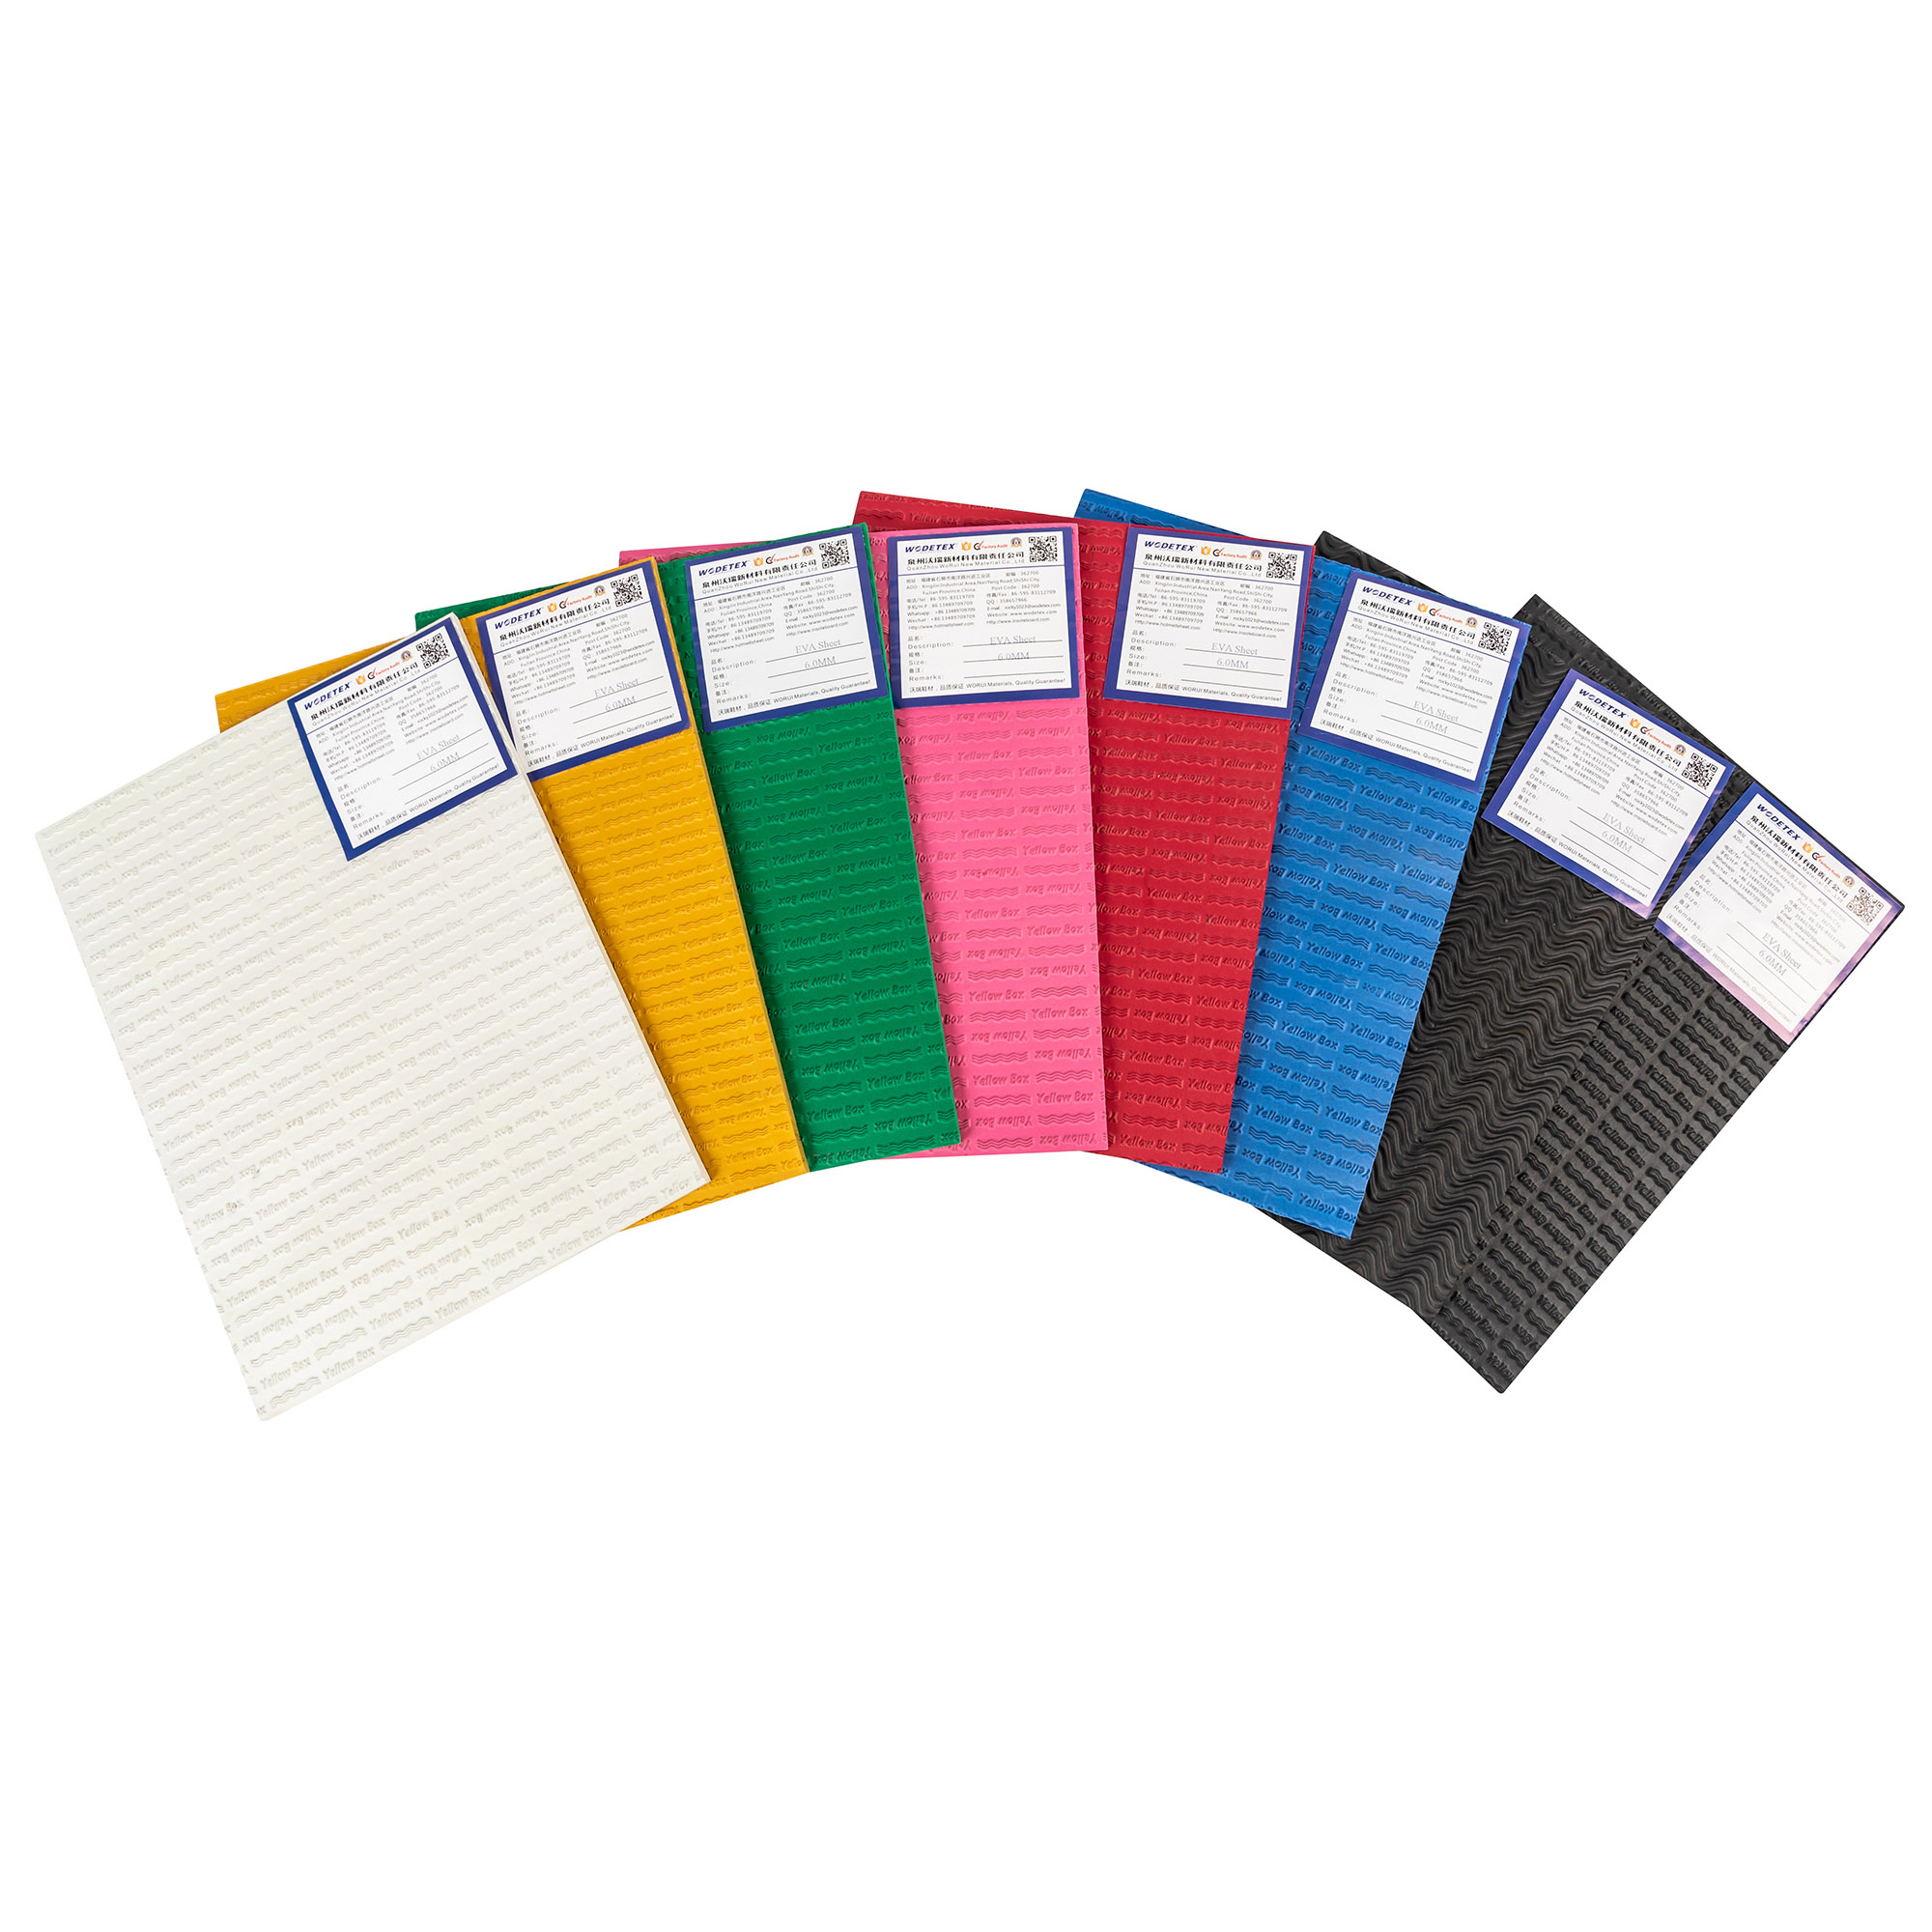 Buy Standard Quality China Wholesale Ultra-thin Eva Foam Sheets Direct from  Factory at Ningbo Hines Rubber & Plastic Co. Ltd